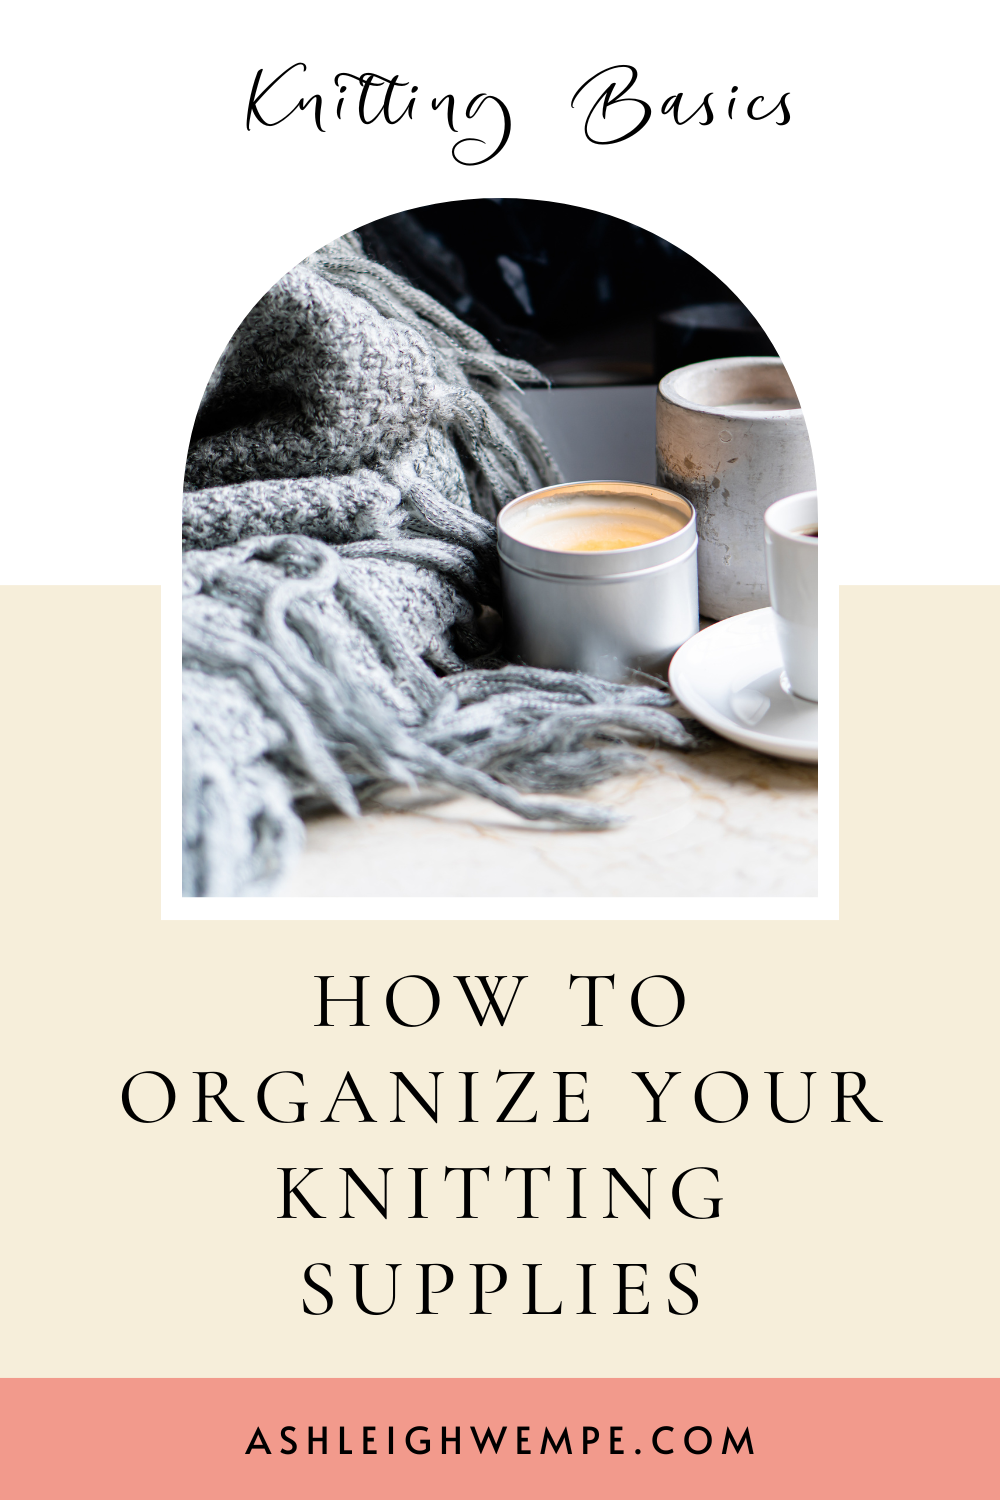 Spring Cleaning: How to Organize your Knitting Supplies (Tips and Tricks for a Clutter-Free Space)